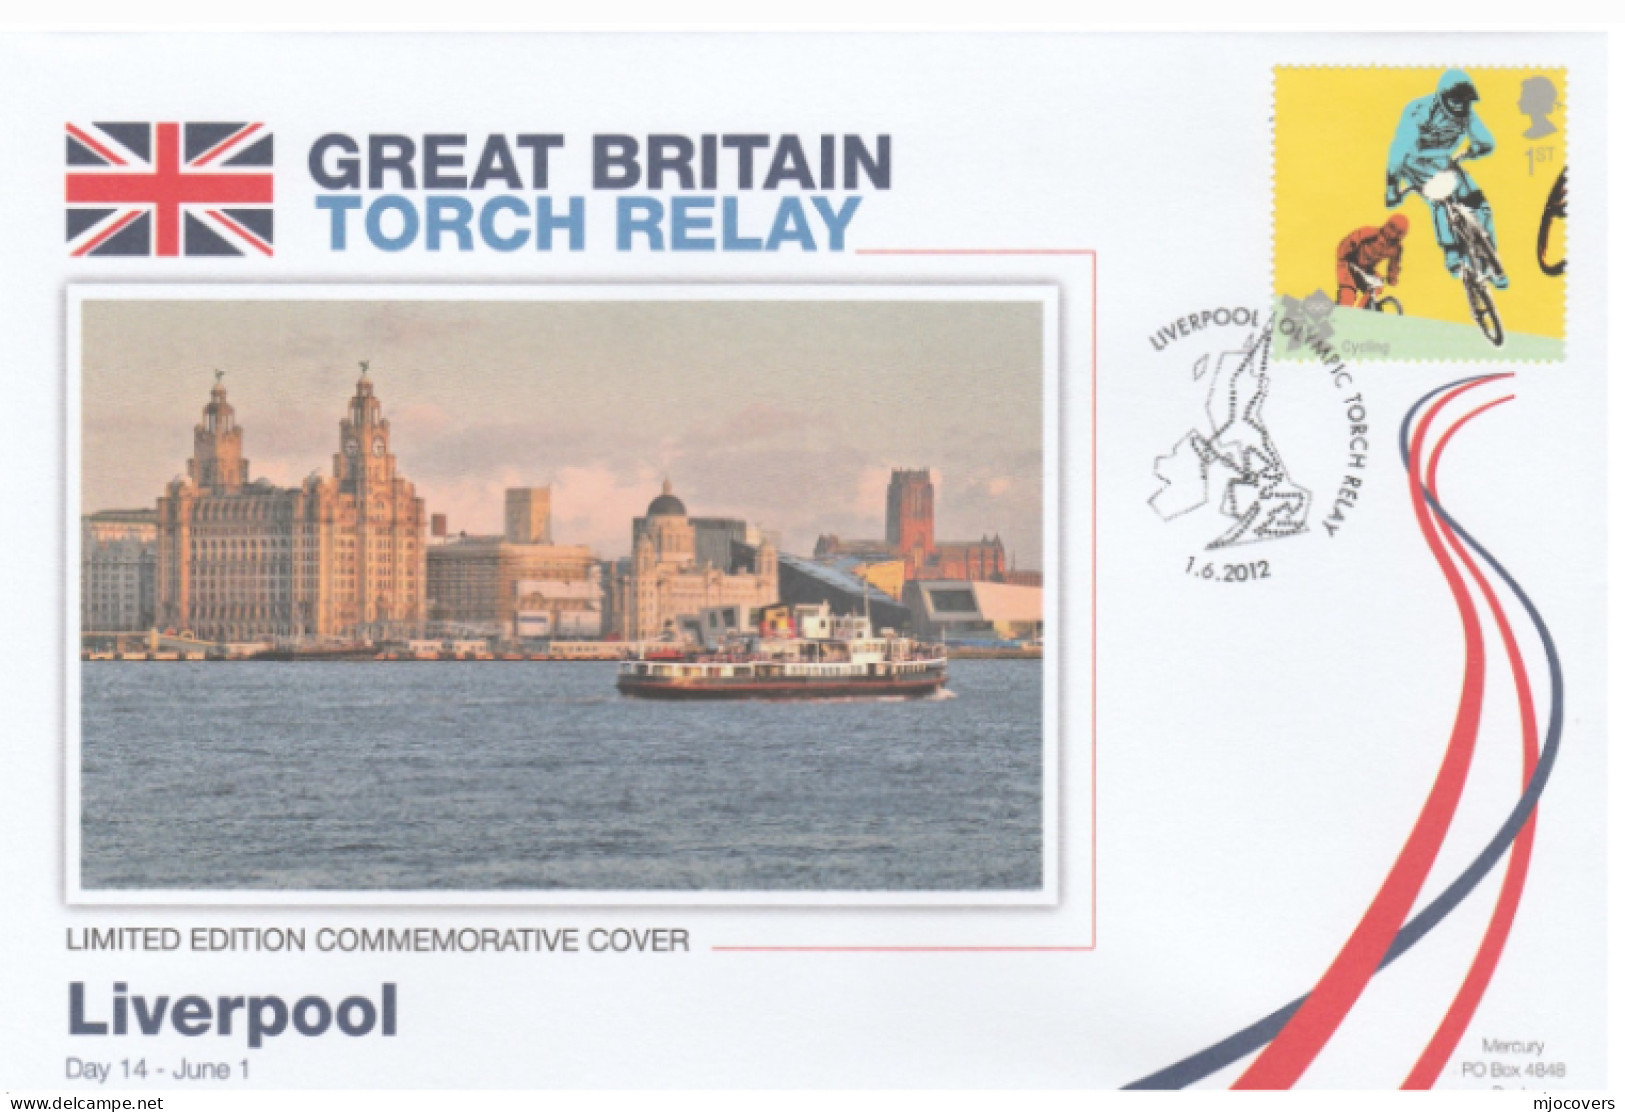 2012 Ltd Edn MERSEY FERRY OLYMPICS TORCH Relay Liverpool COVER London OLYMPIC GAMES Sport BMX Cycling Bicycle  Stamps GB - Eté 2012: Londres